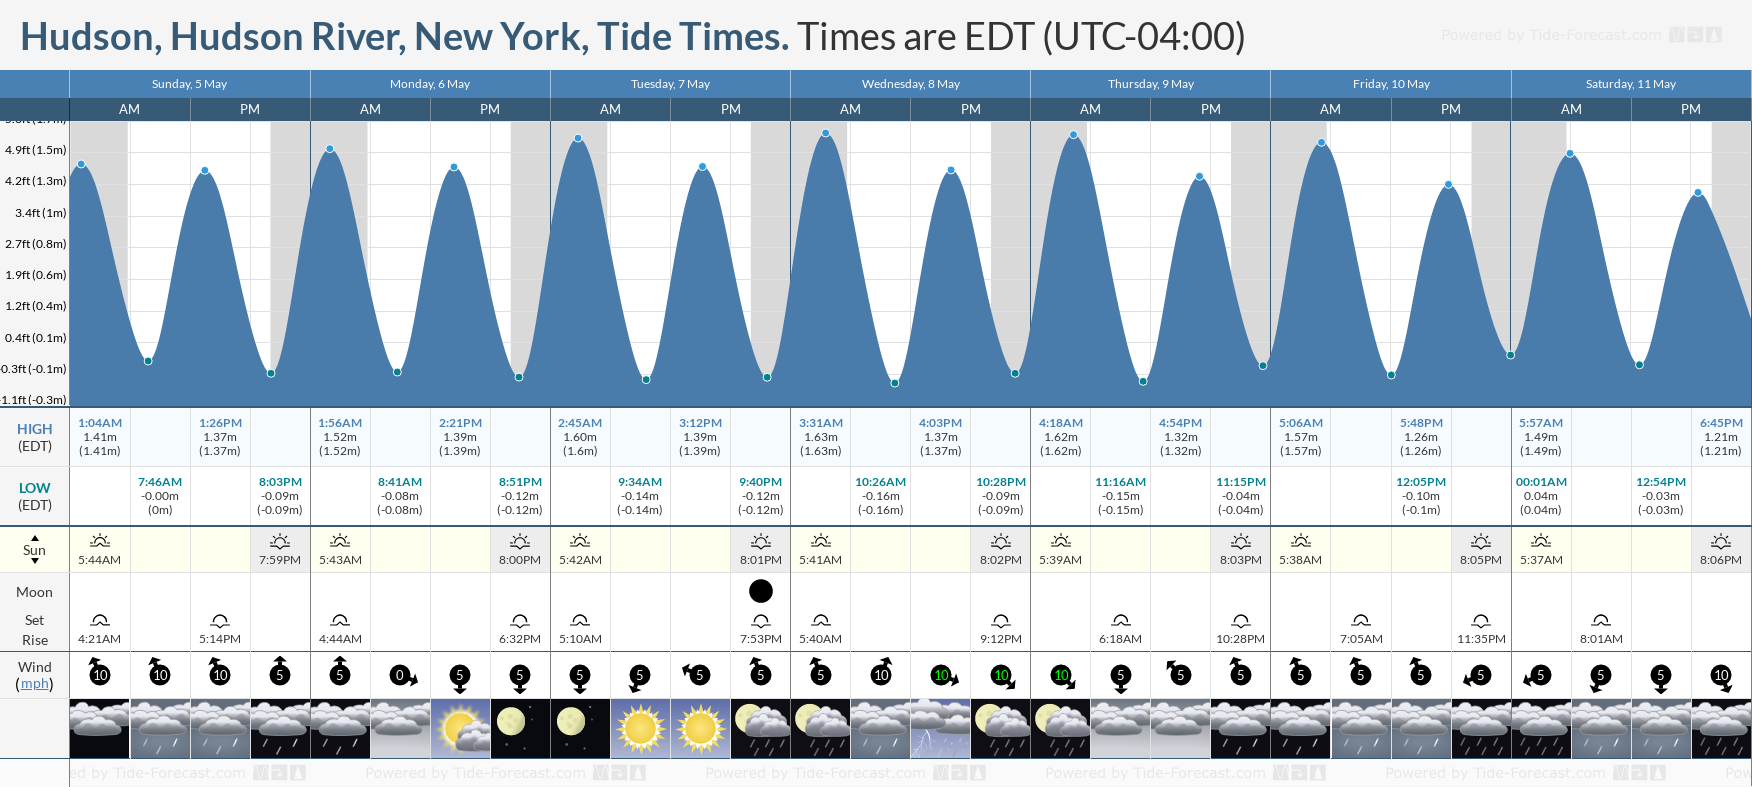 Hudson, Hudson River, New York Tide Chart including high and low tide tide times for the next 7 days